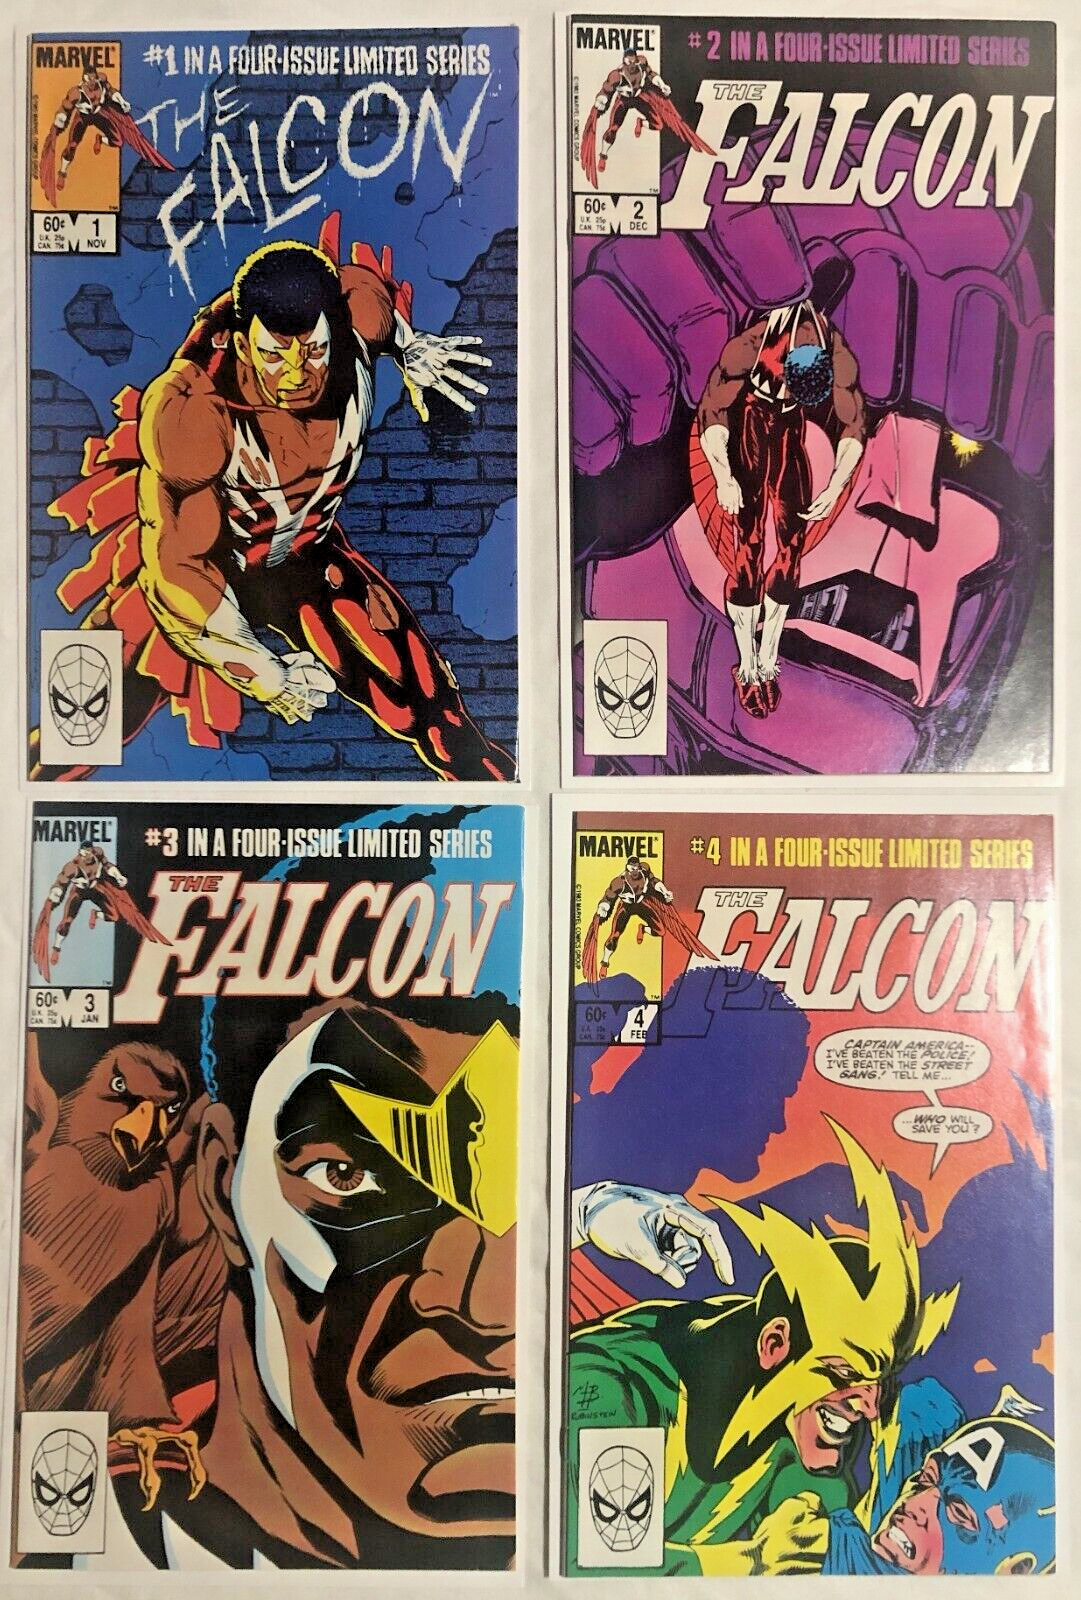 The Falcon 1983 Four-Issue Limited Edition Series All High-Grade 9.8 Candidates